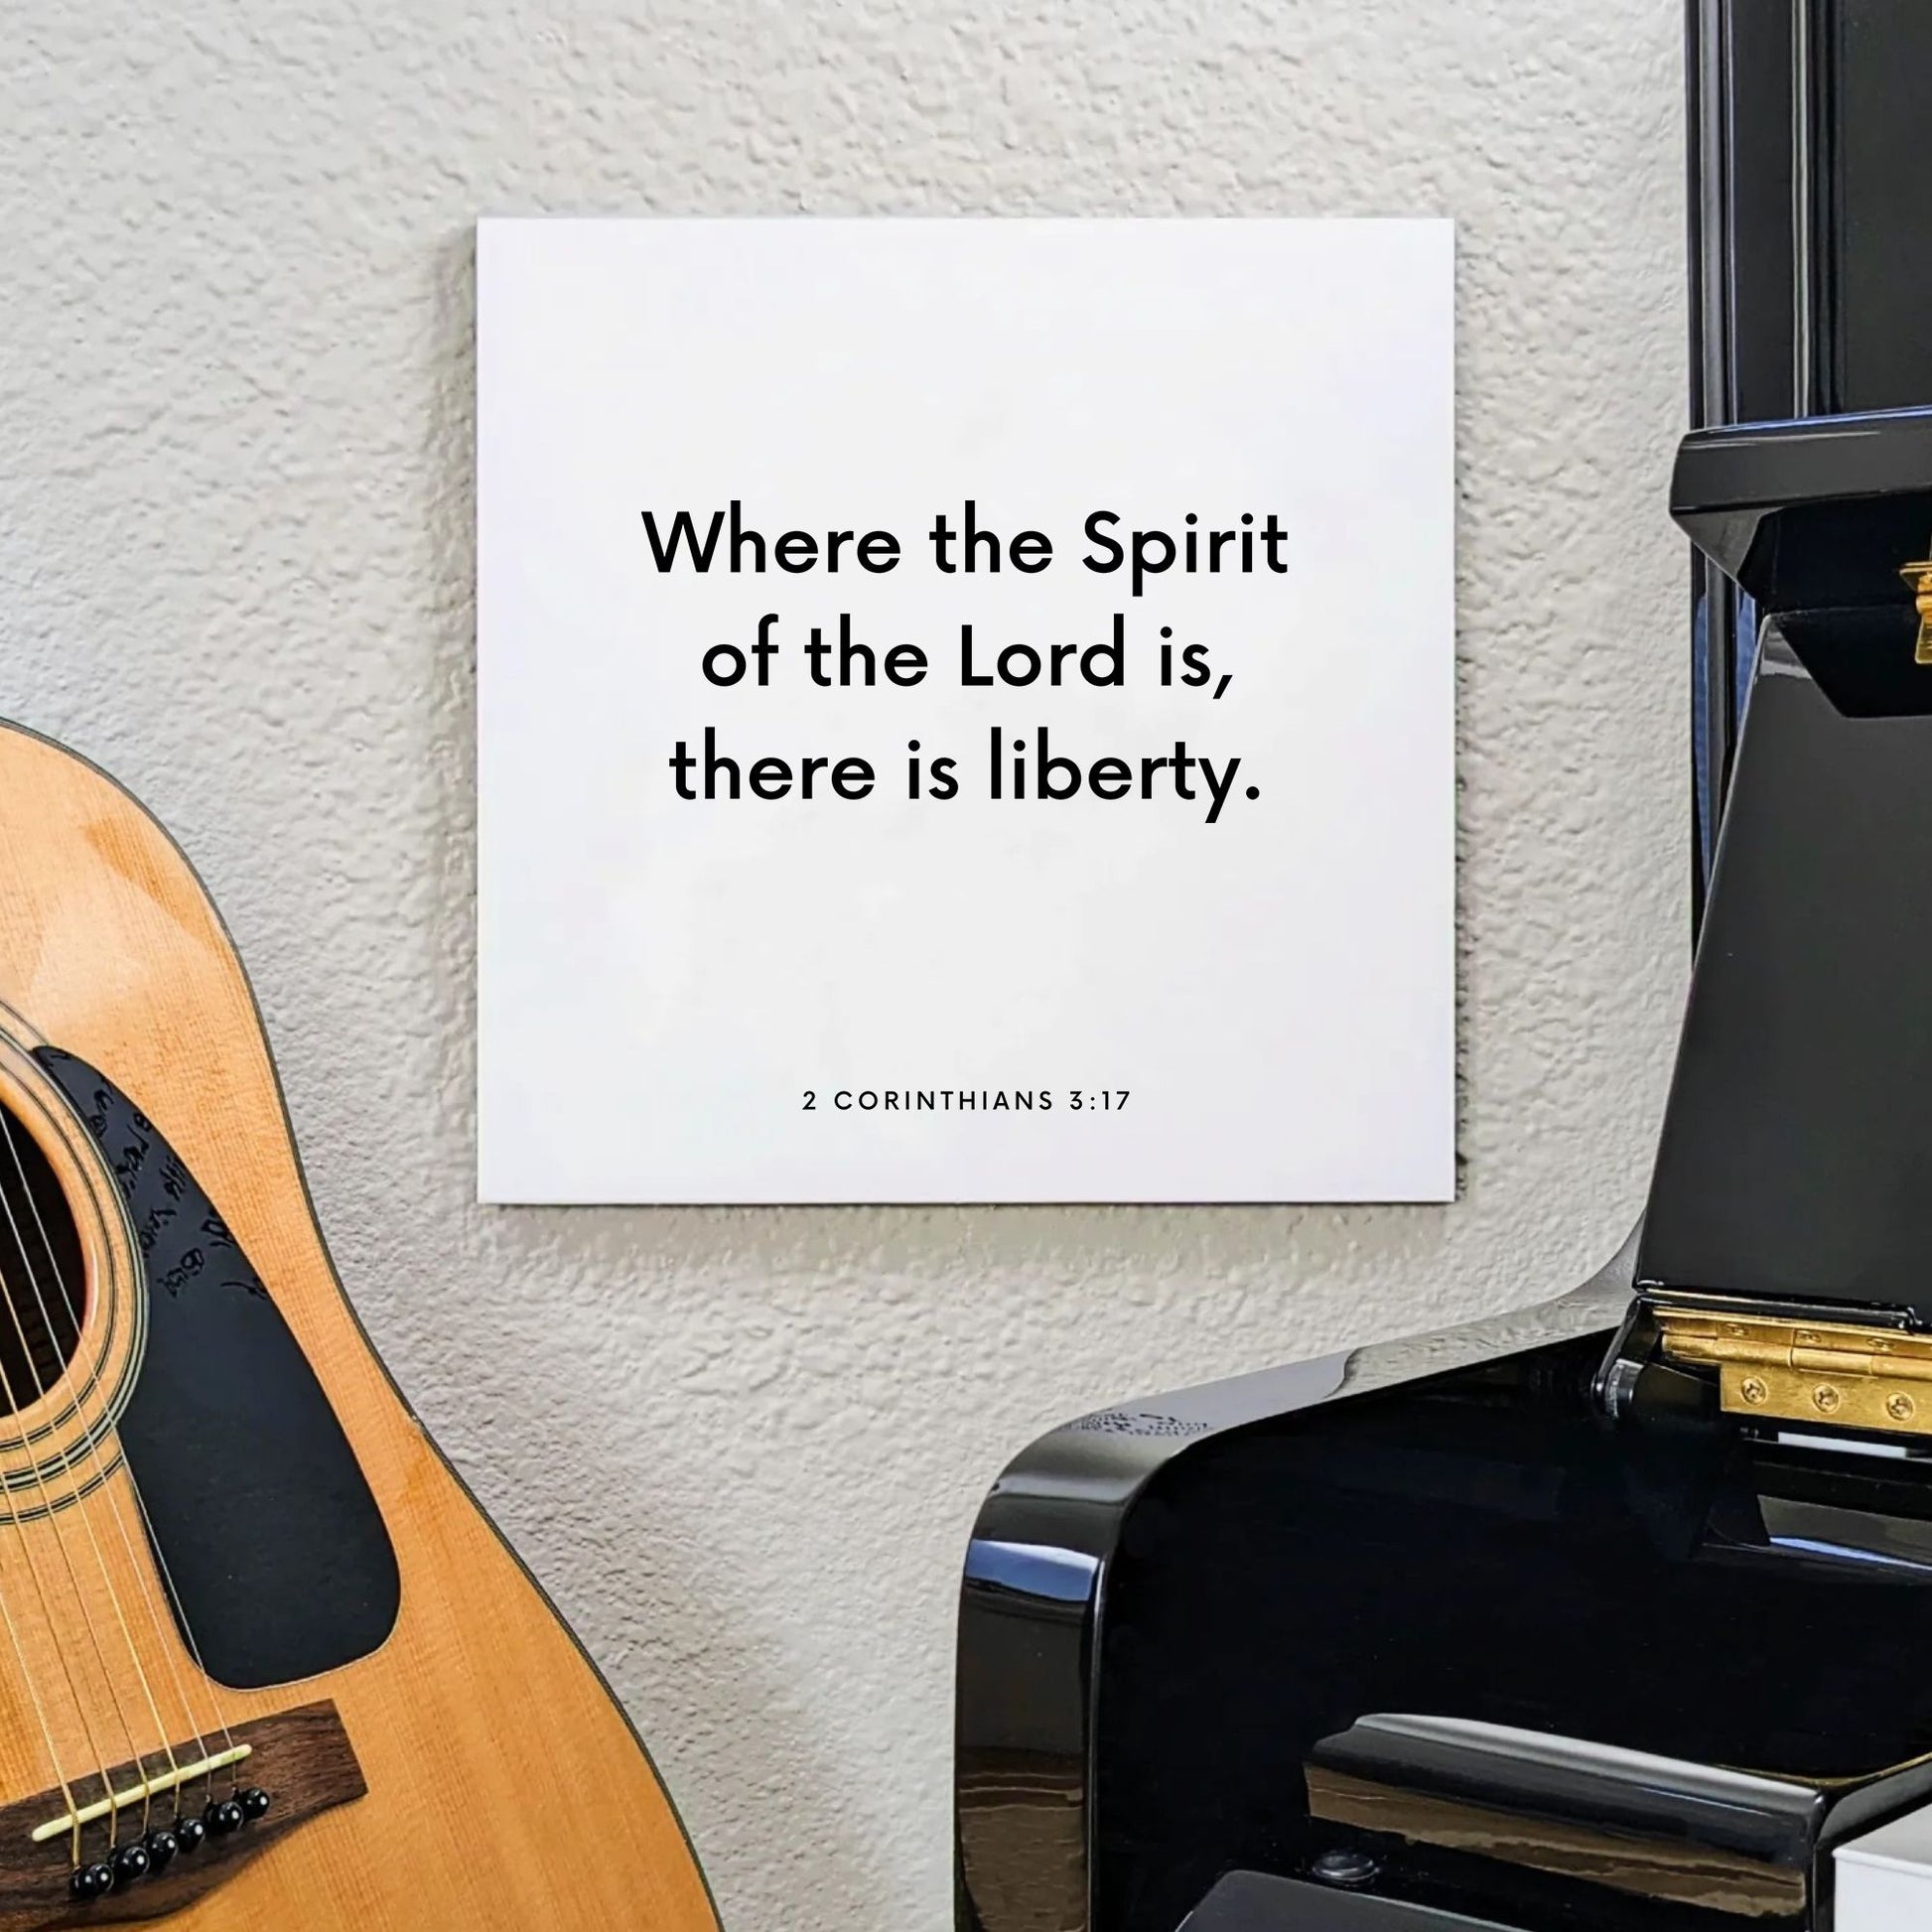 Music mouting of the scripture tile for 2 Corinthians 3:17 - "Where the Spirit of the Lord is, there is liberty"